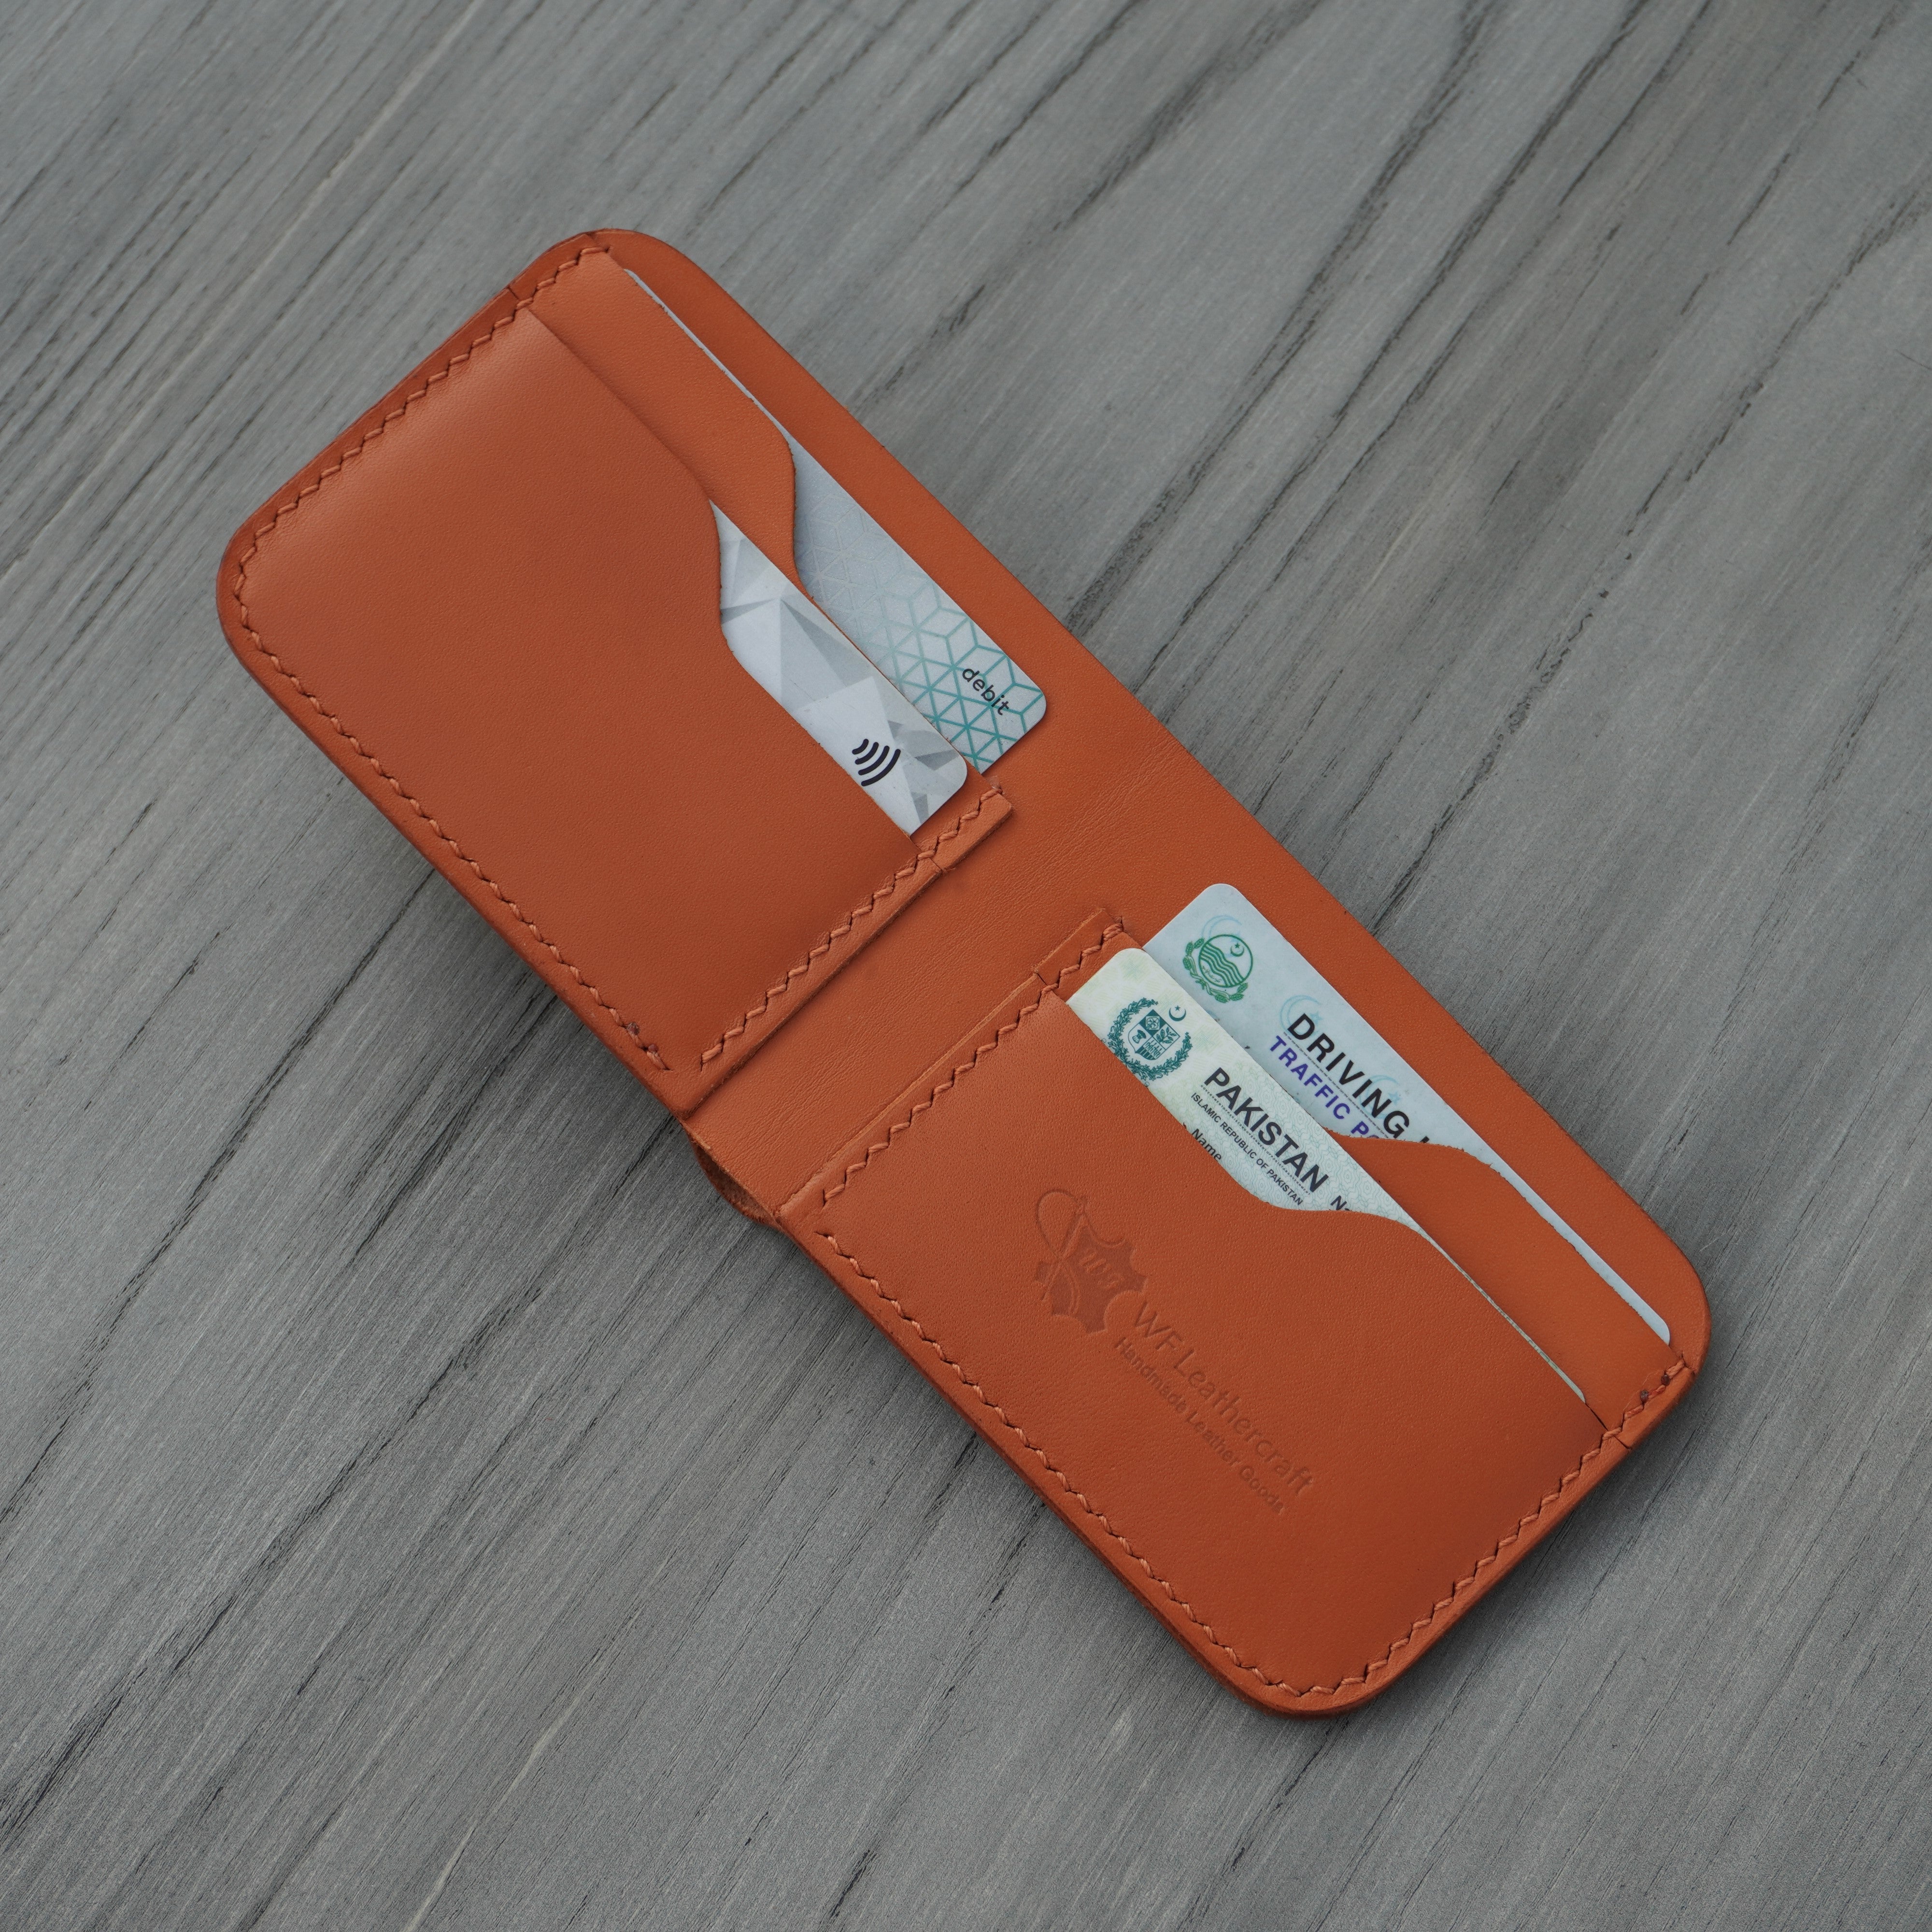 No.55 Bifold Leather Wallet (Italian Tan color)